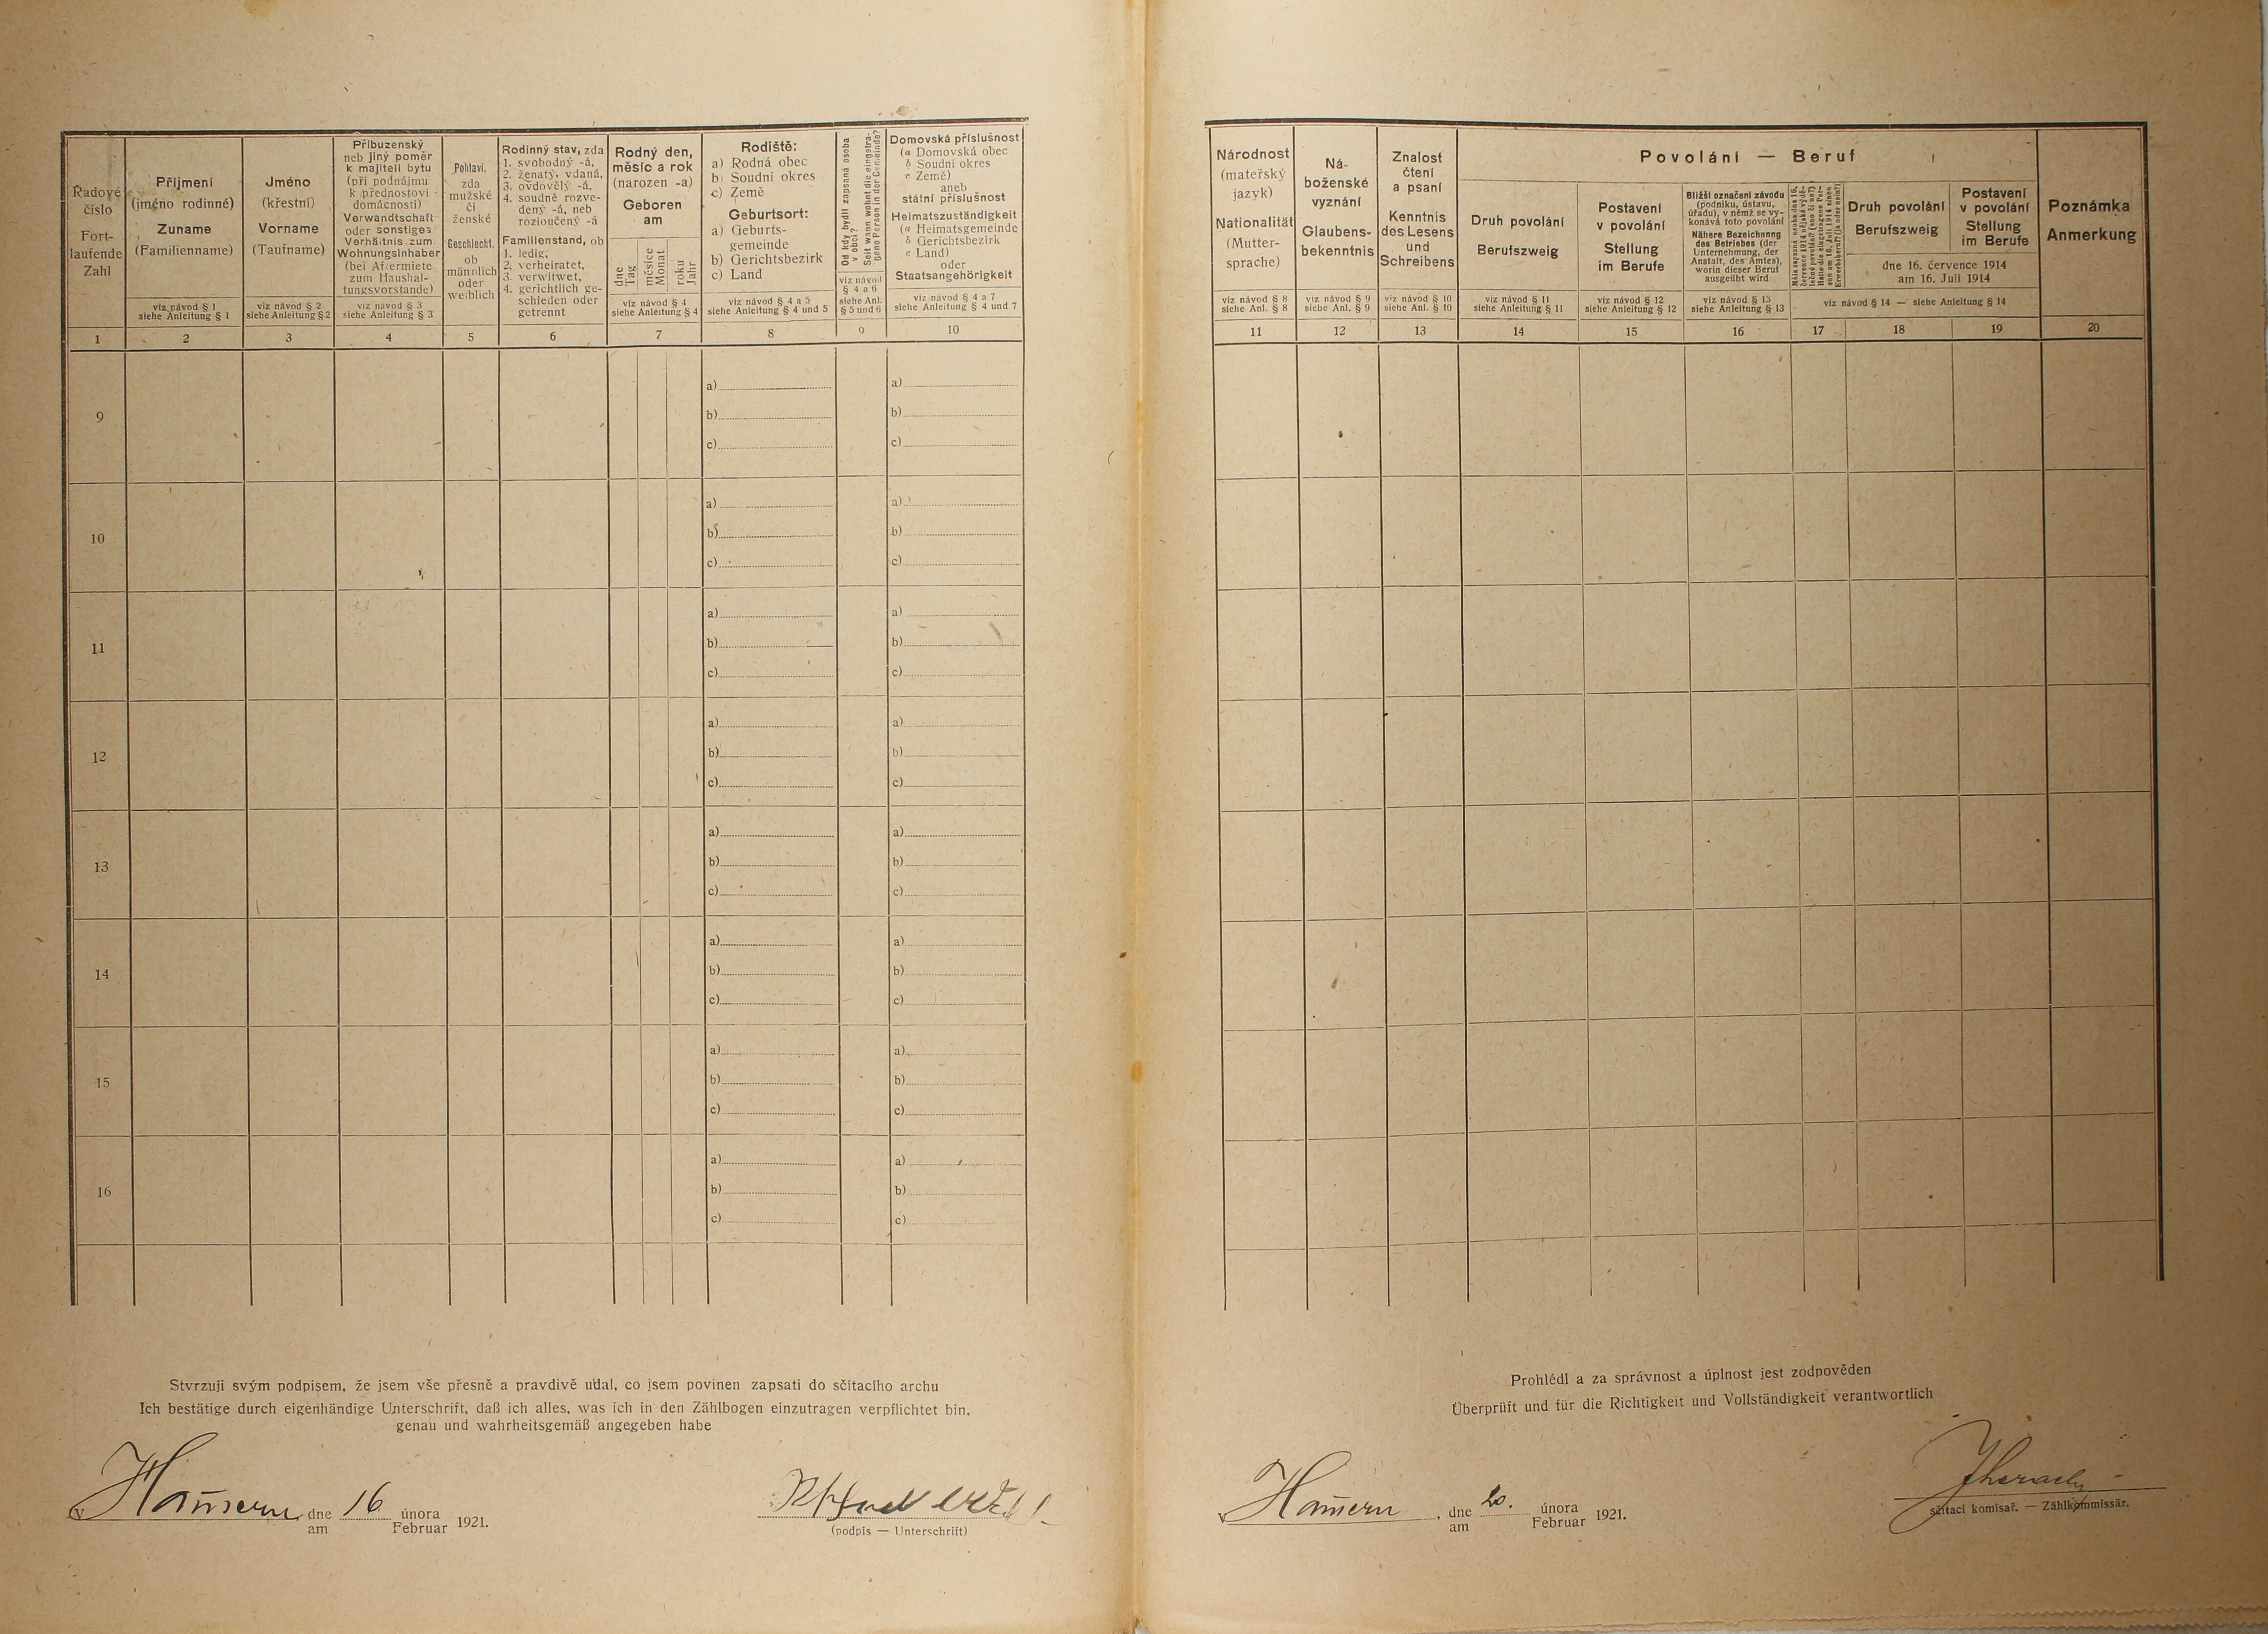 3. soap-kt_01159_census-1921-hamry-cp138_0030